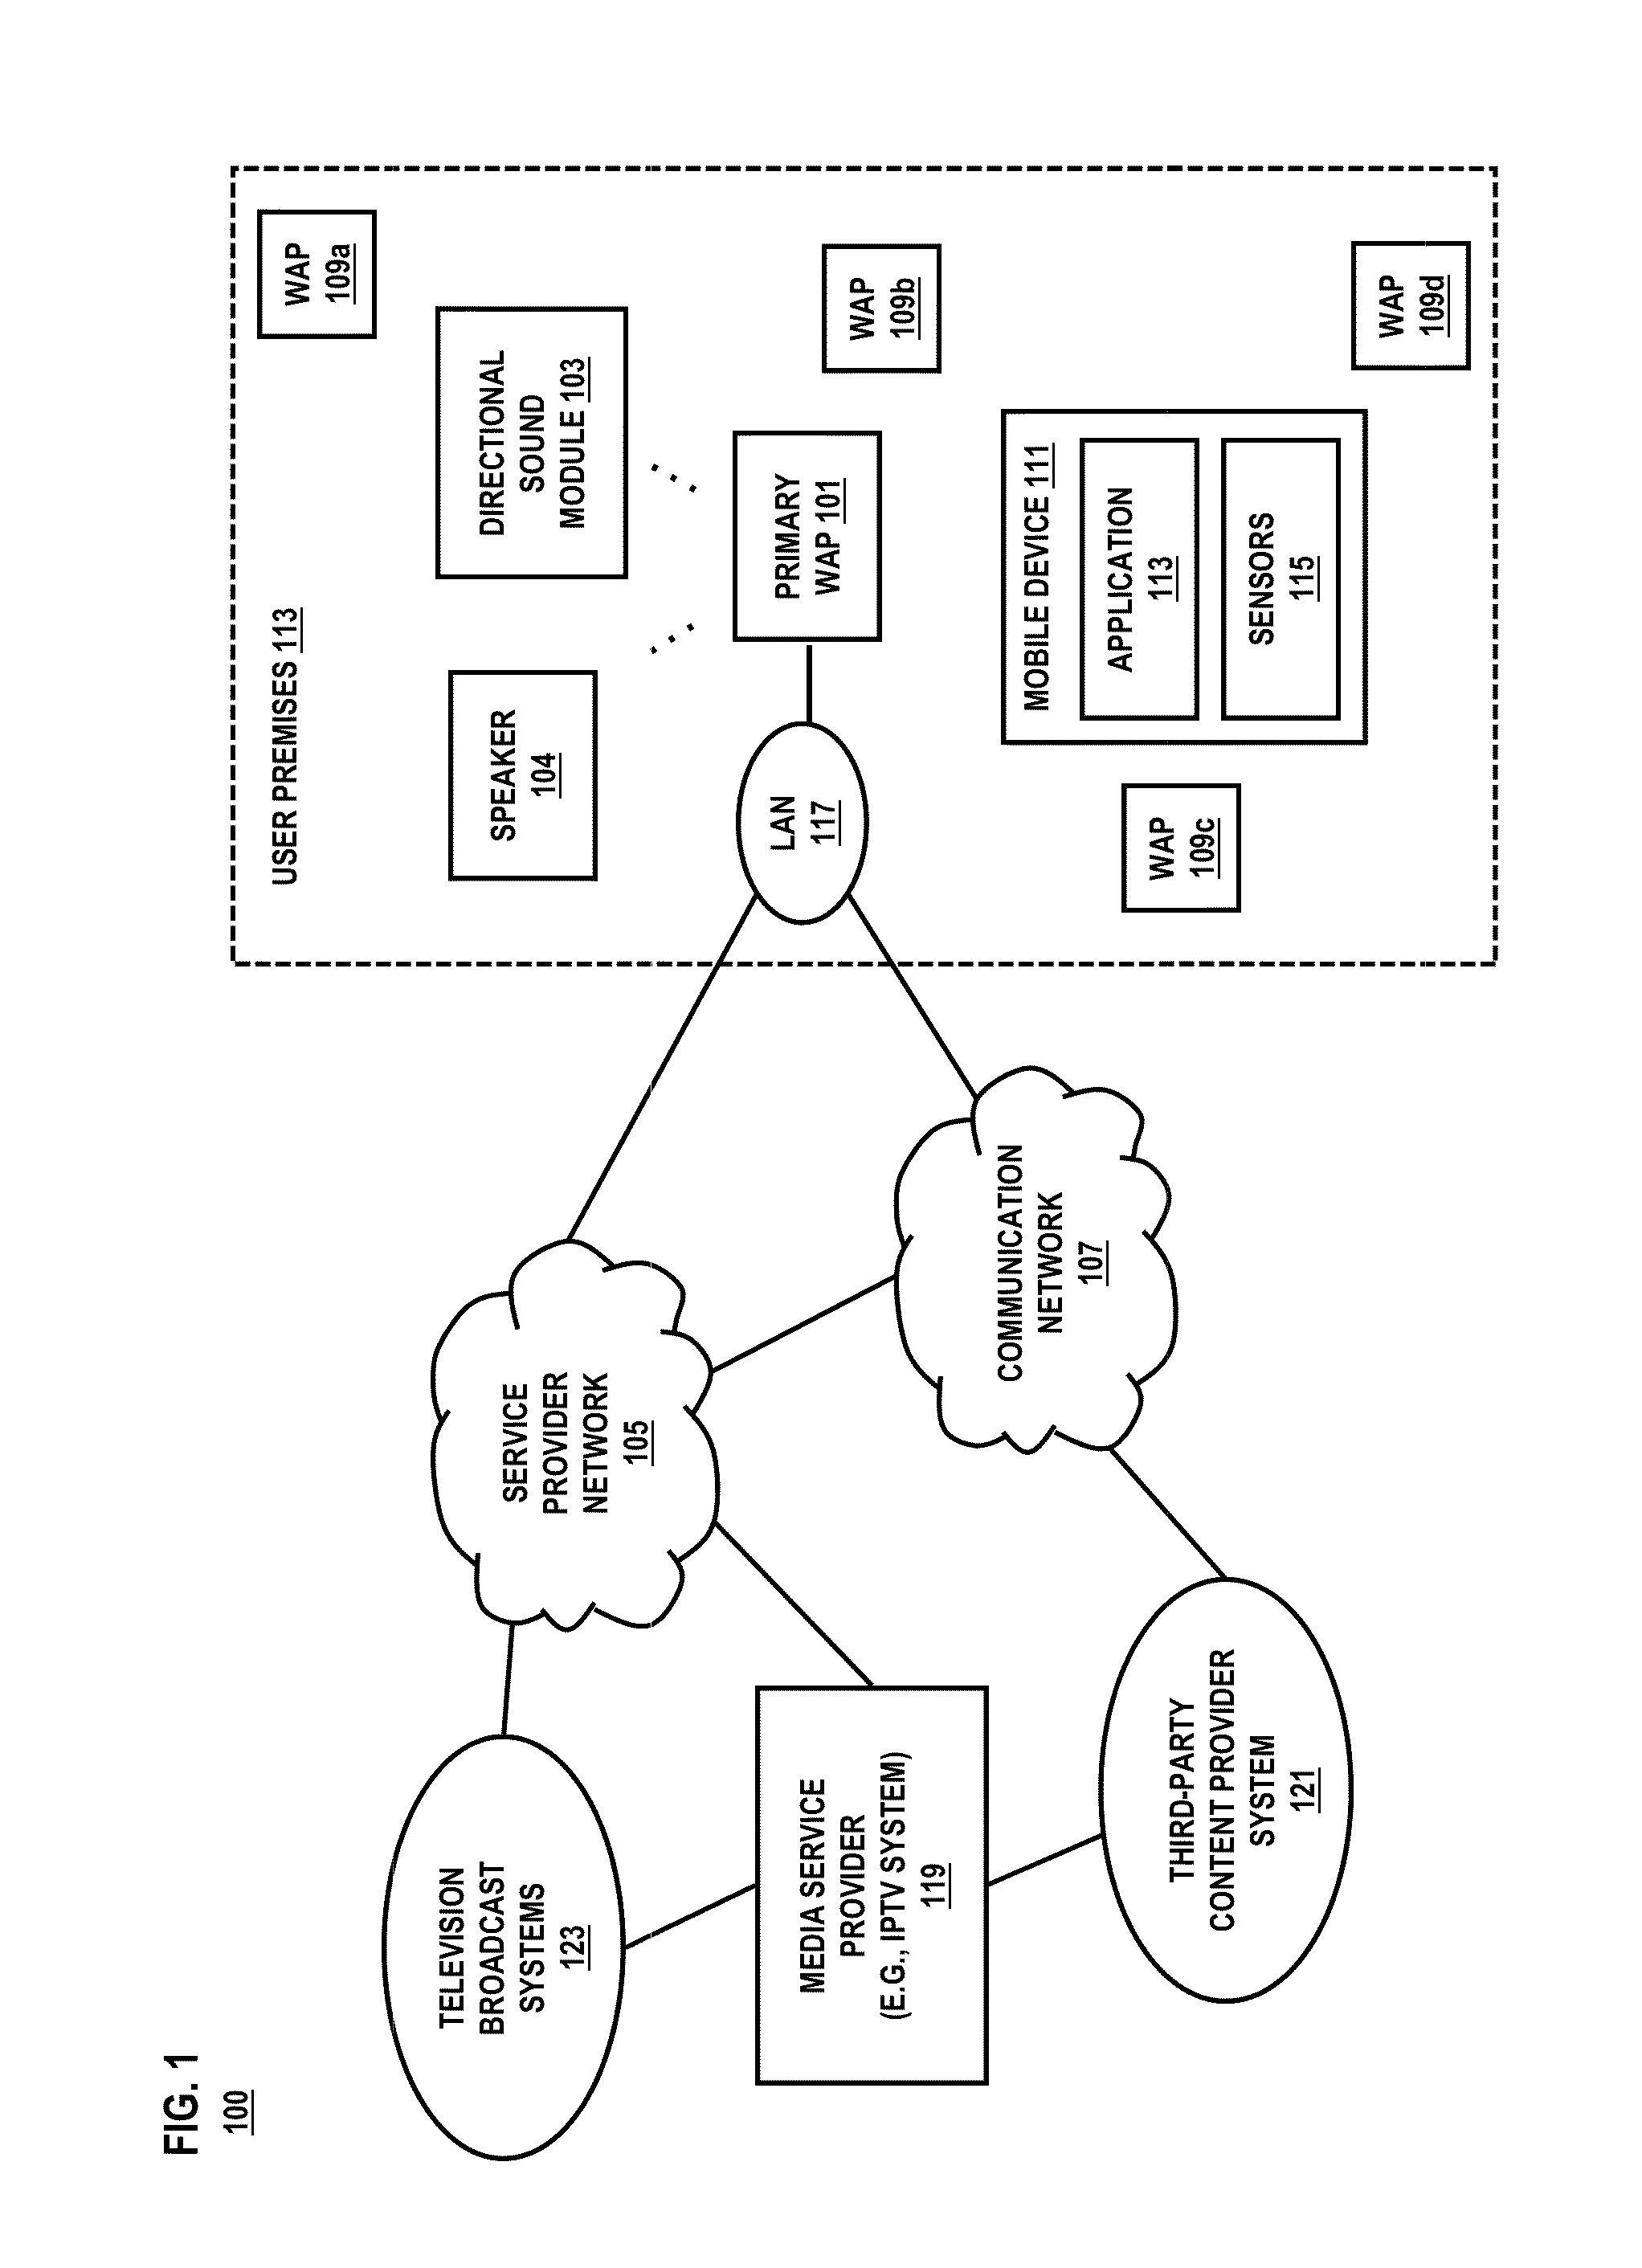 Method and system for directing sound to a select user within a premises